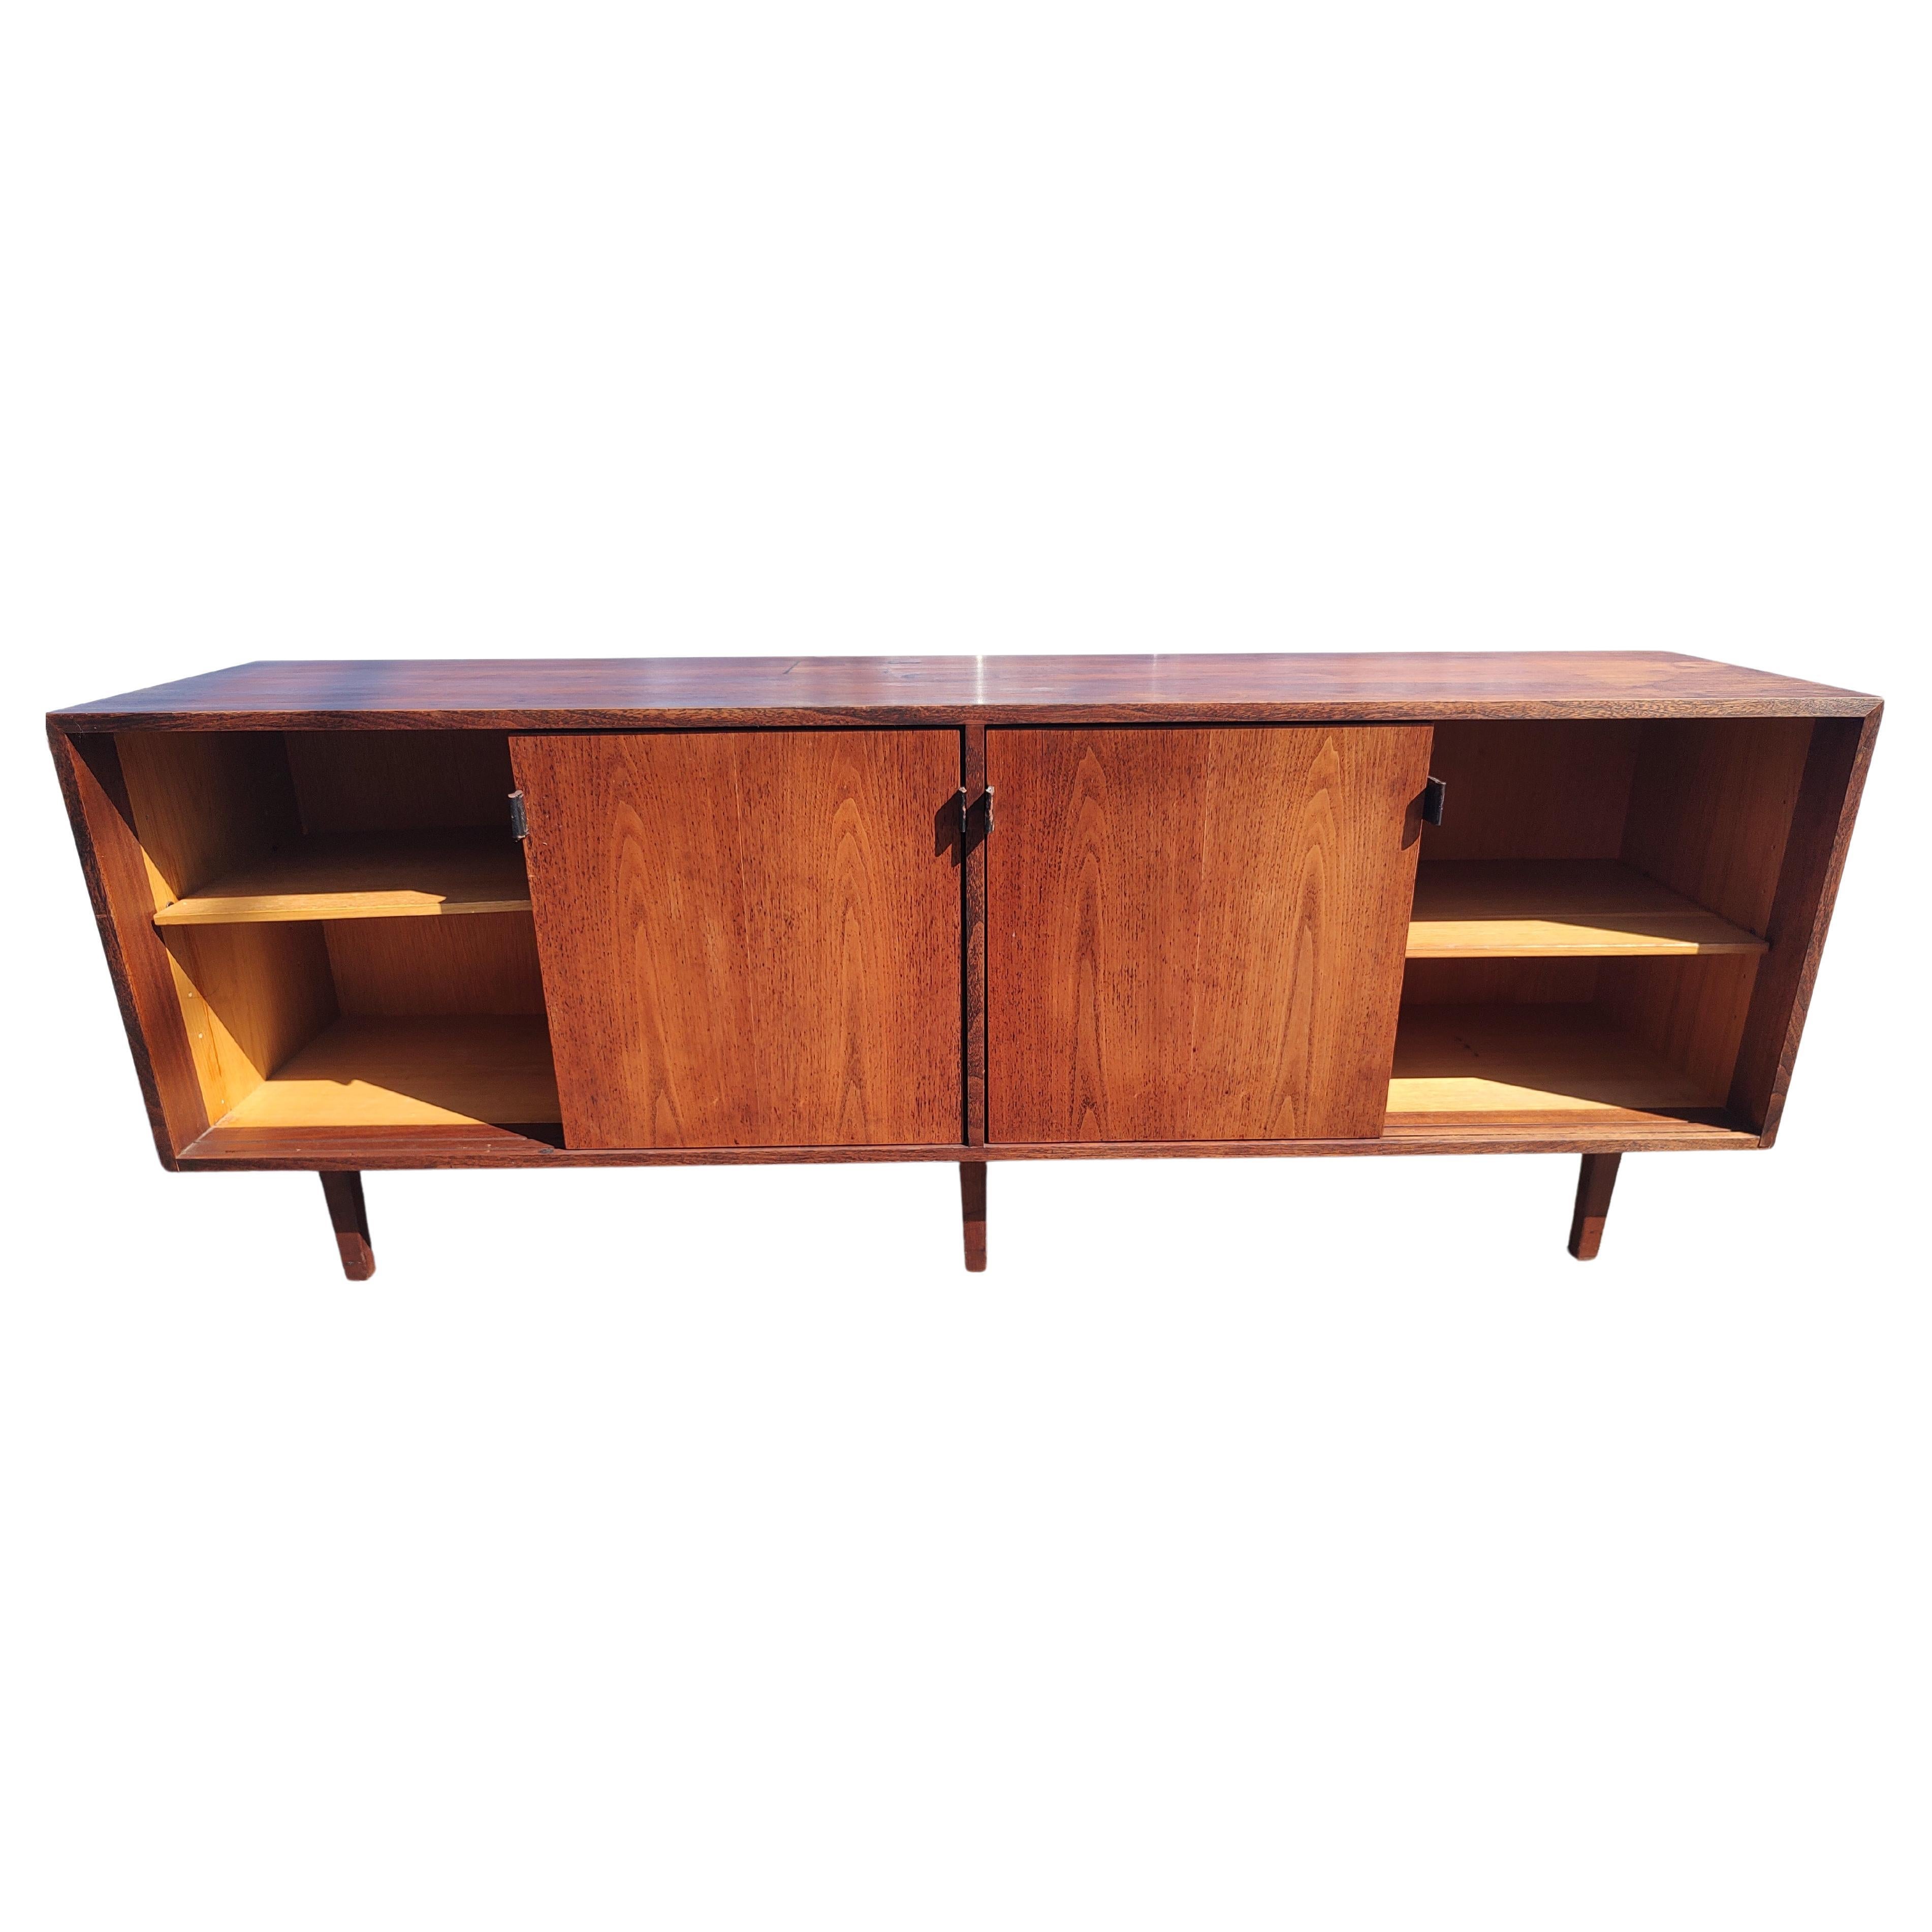 American Mid Century Modern 4 Door Early Walnut Credenza by Knoll For Sale